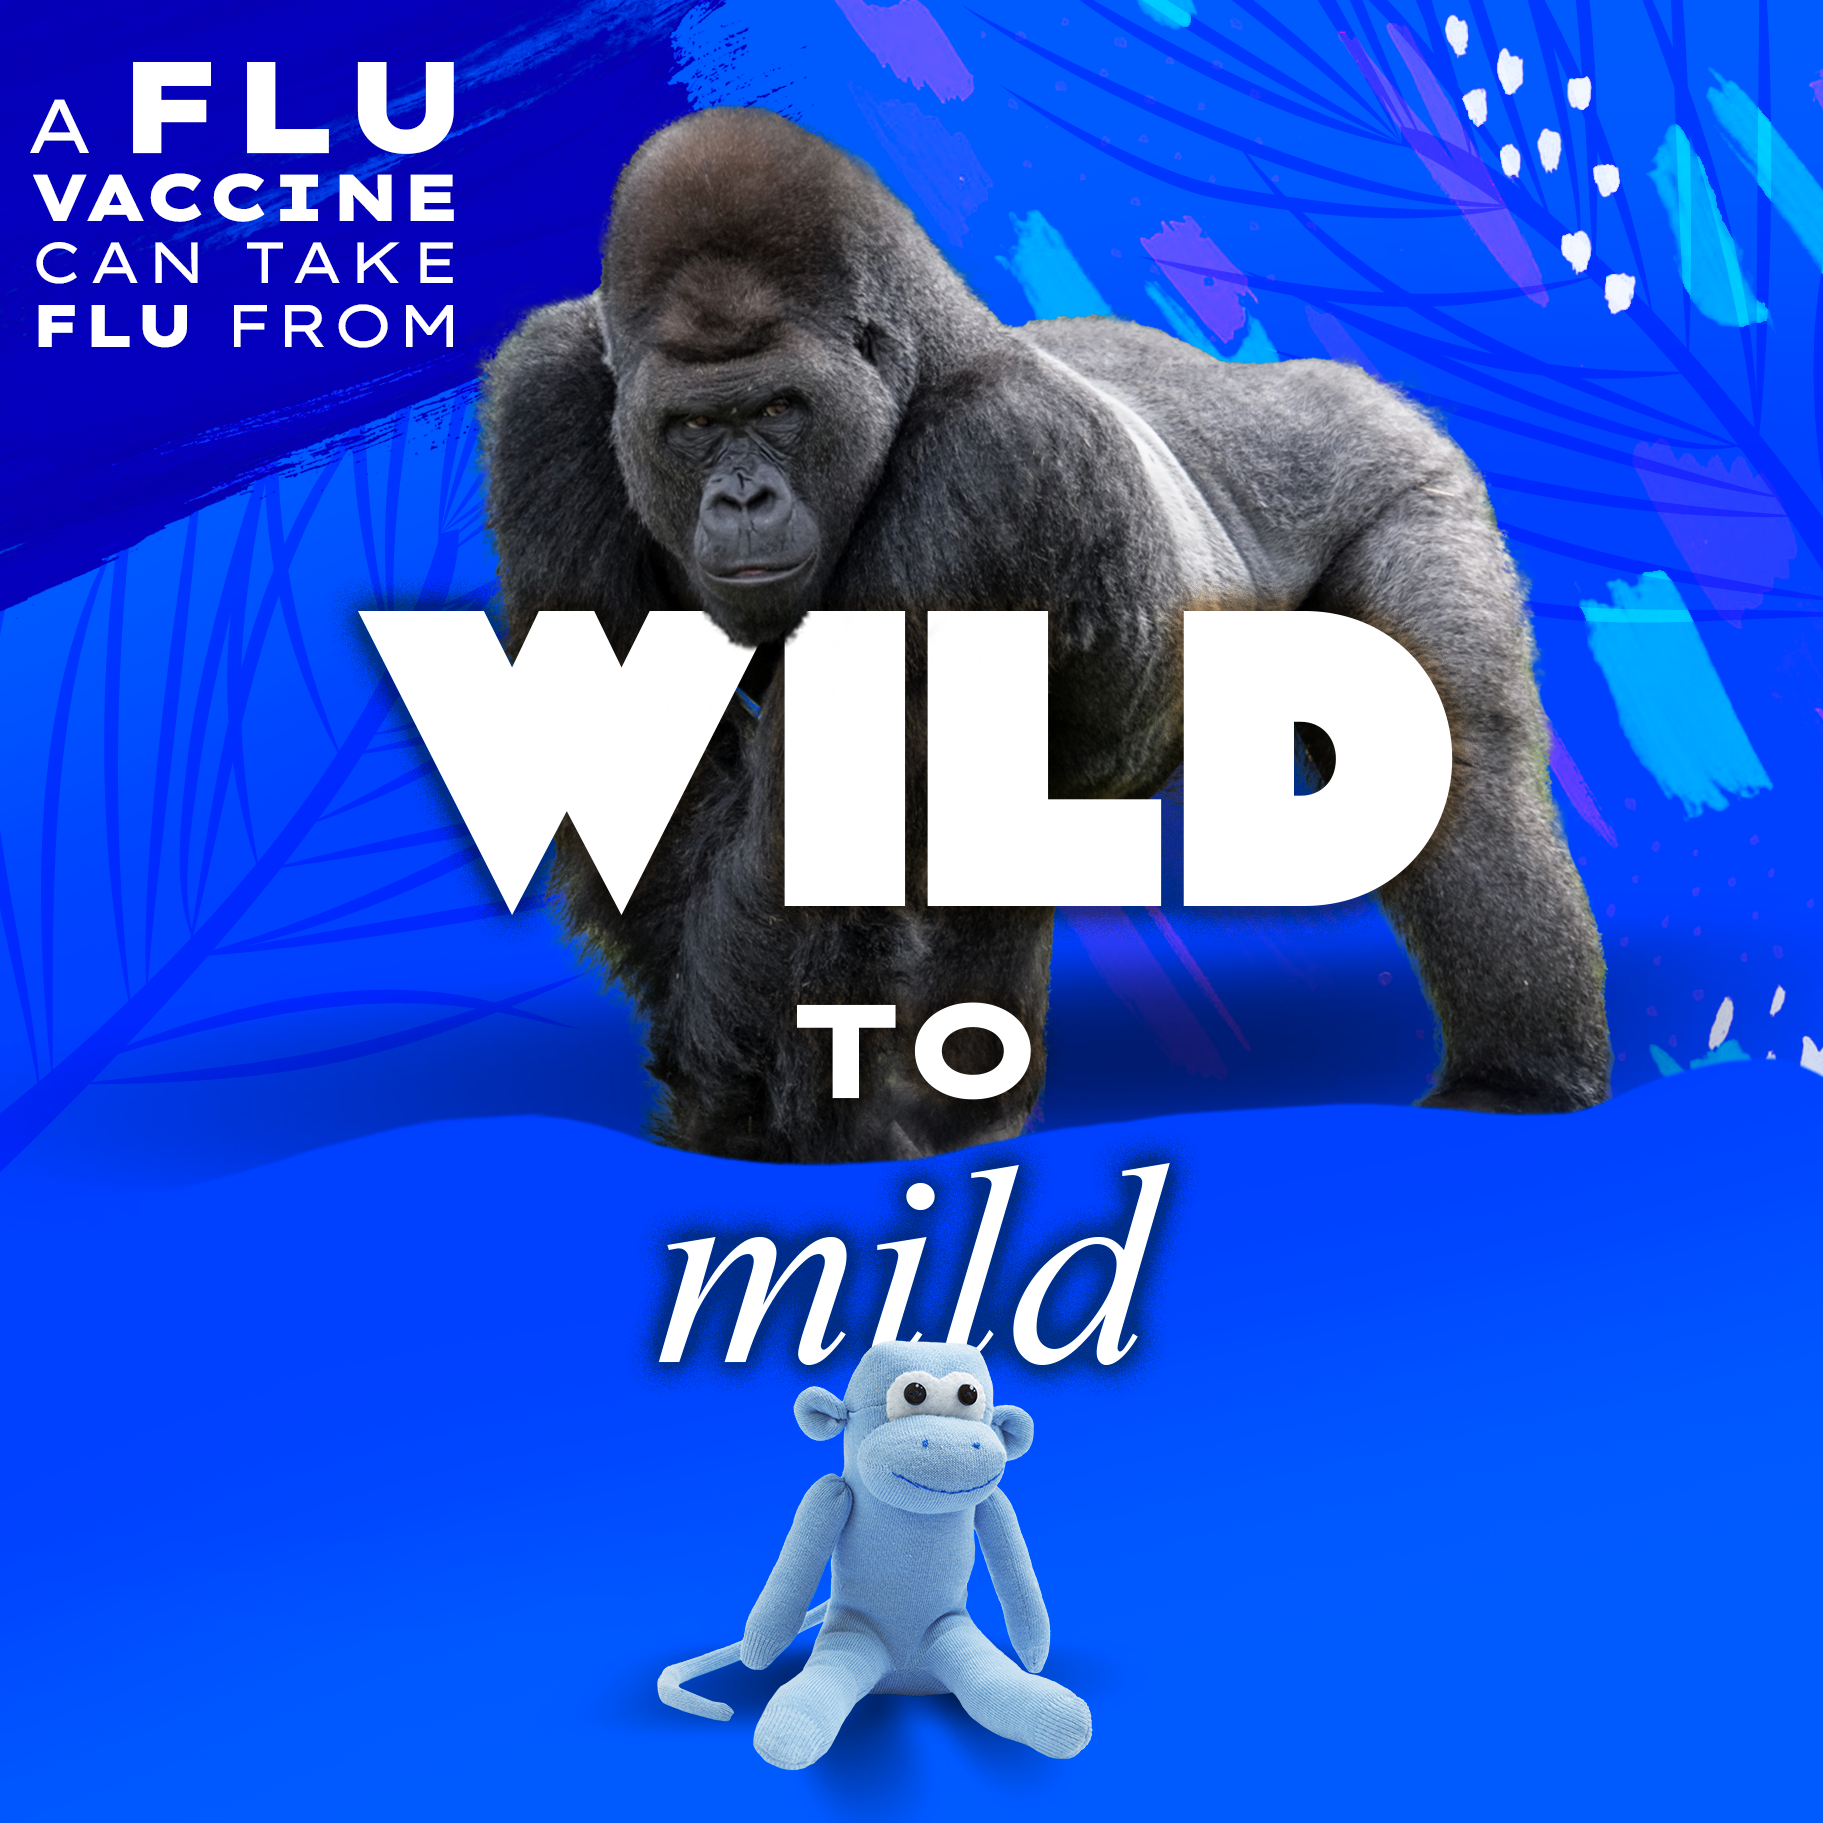 gorilla with text: A flu vaccine can take flu from wild to mild